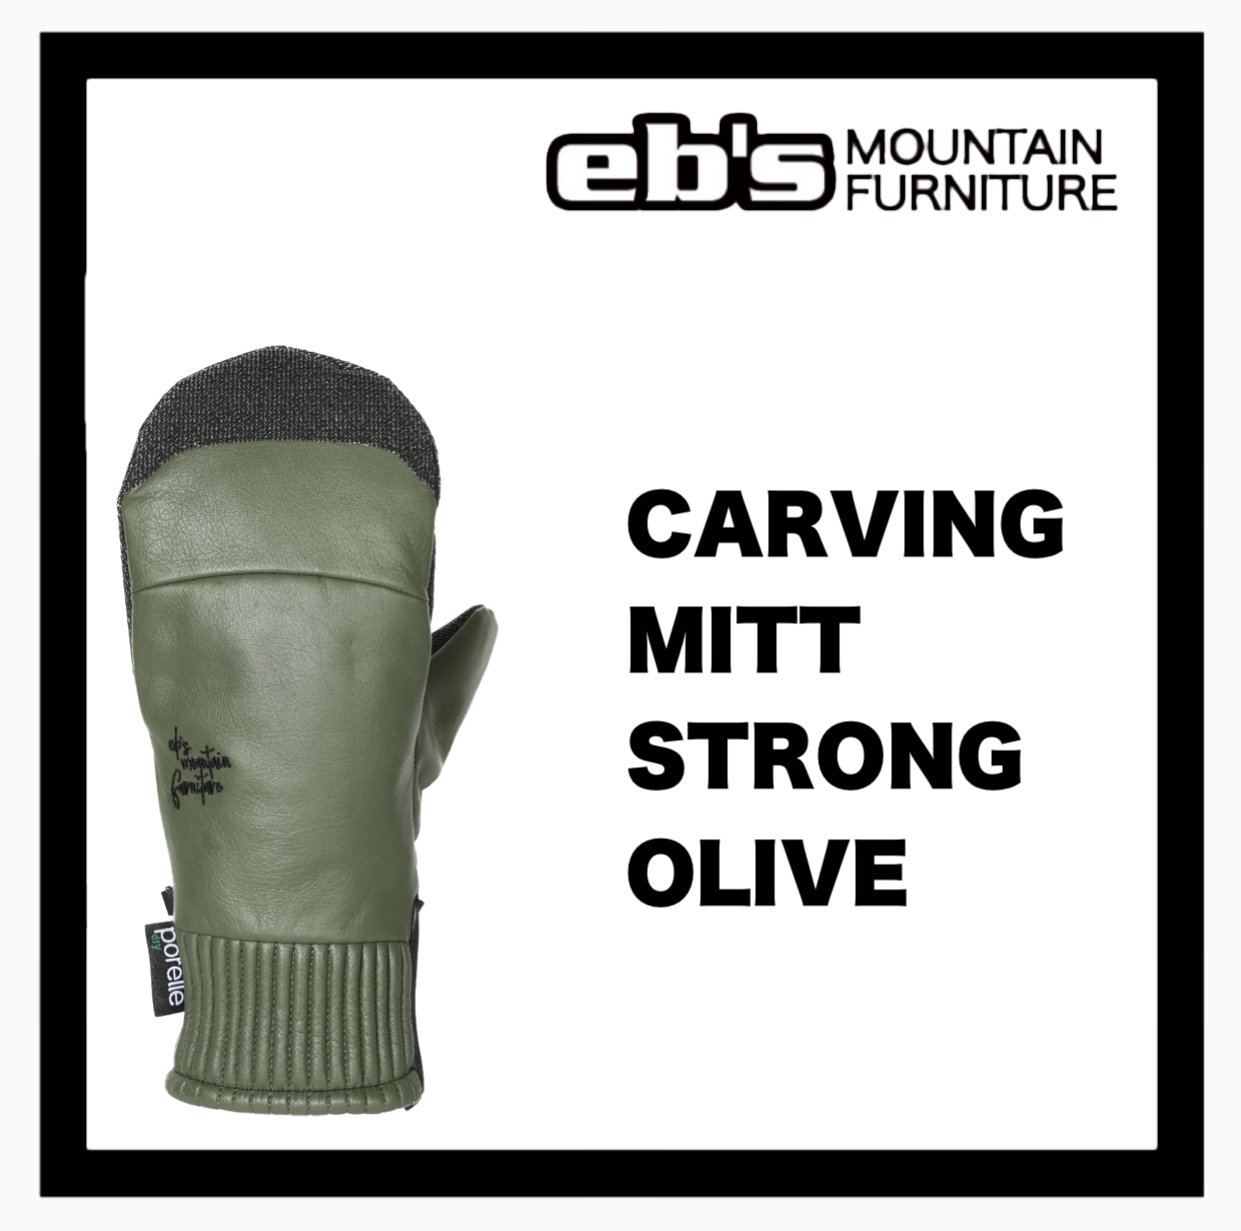 <img class='new_mark_img1' src='https://img.shop-pro.jp/img/new/icons34.gif' style='border:none;display:inline;margin:0px;padding:0px;width:auto;' />eb'sCARVING MITT / STRONG  OLIVE